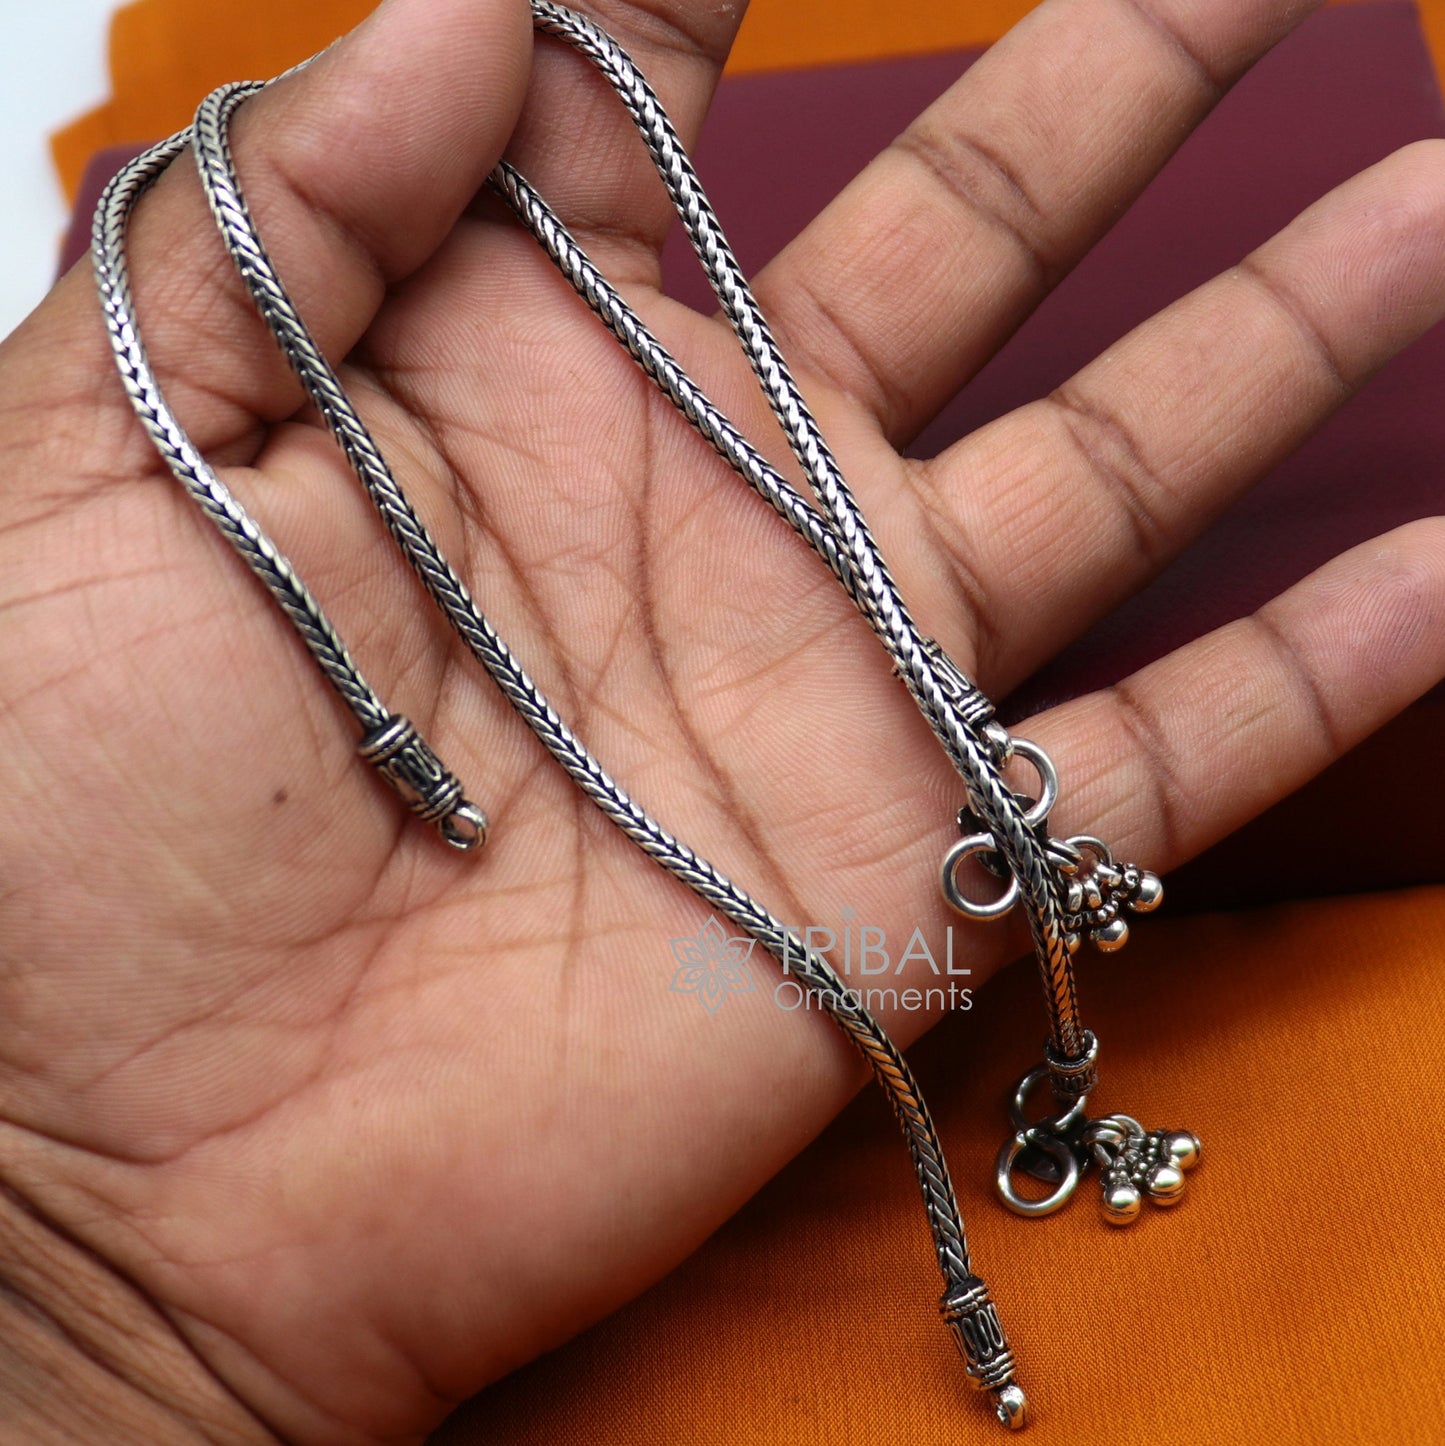 3mm 925 Sterling silver handmade wheat chain ankle bracelet, vintage oxidized charm anklets, tribal belly dance customized jewelry nank575 - TRIBAL ORNAMENTS